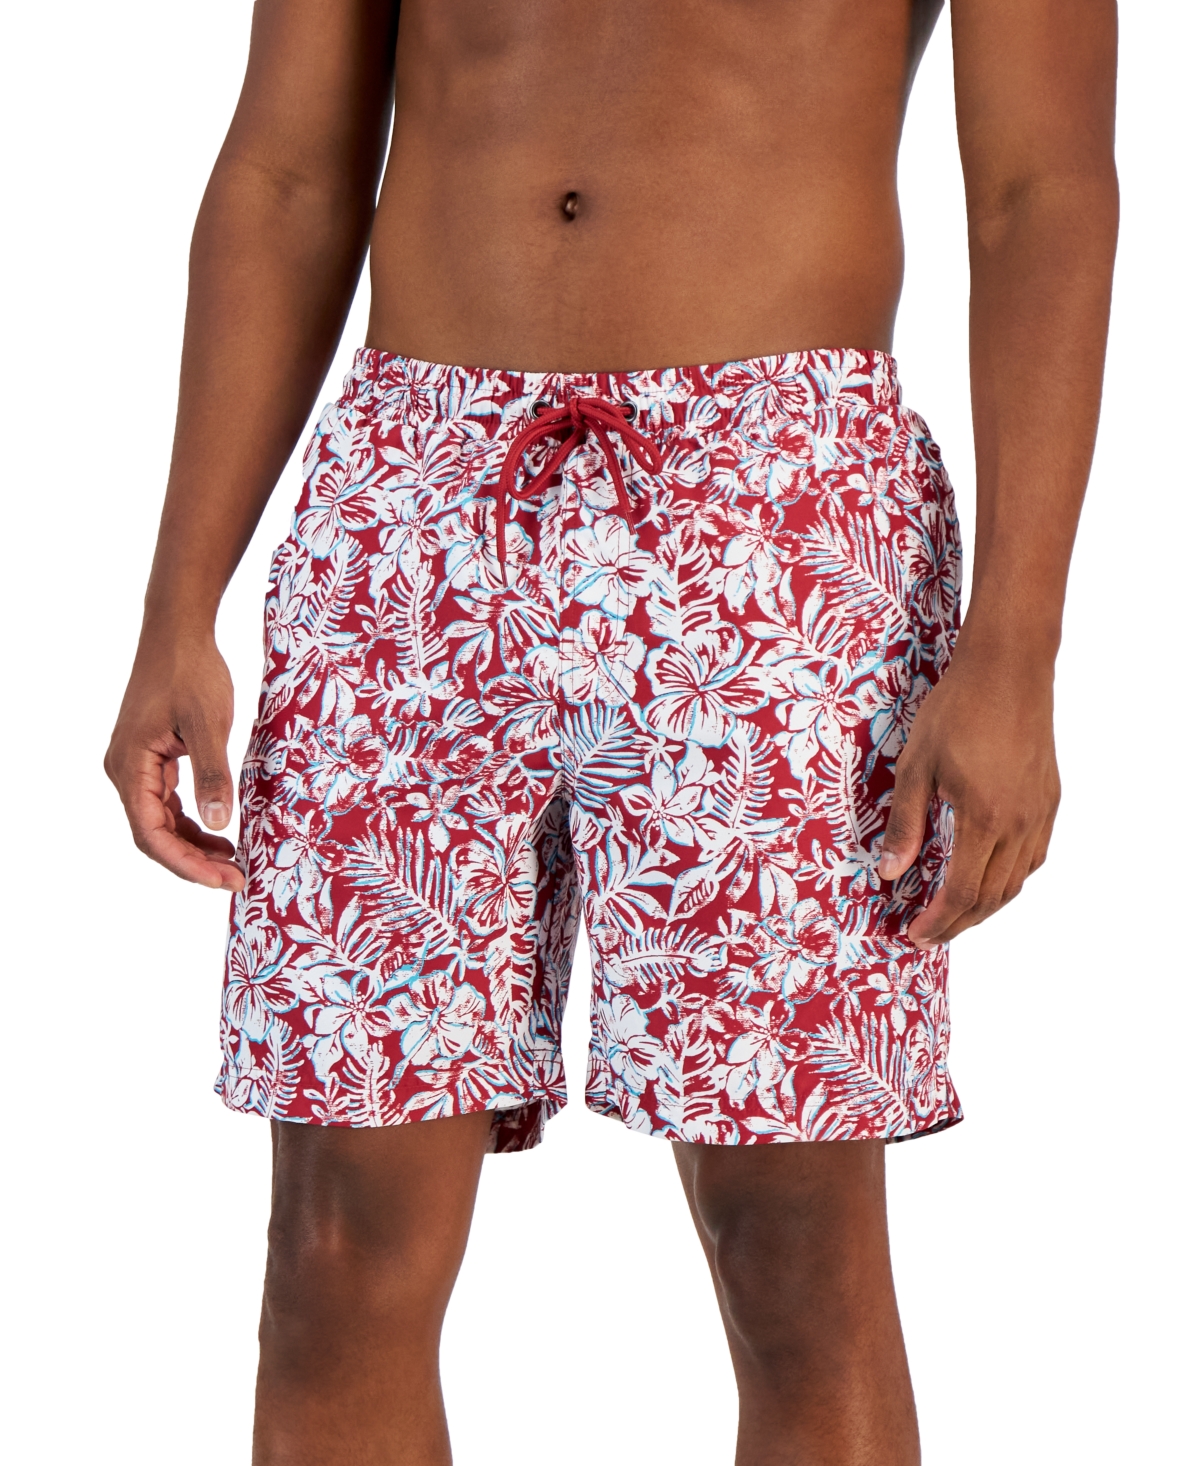 Club Room Men's Mahalo Floral Swim Trunks, Created for Macy's